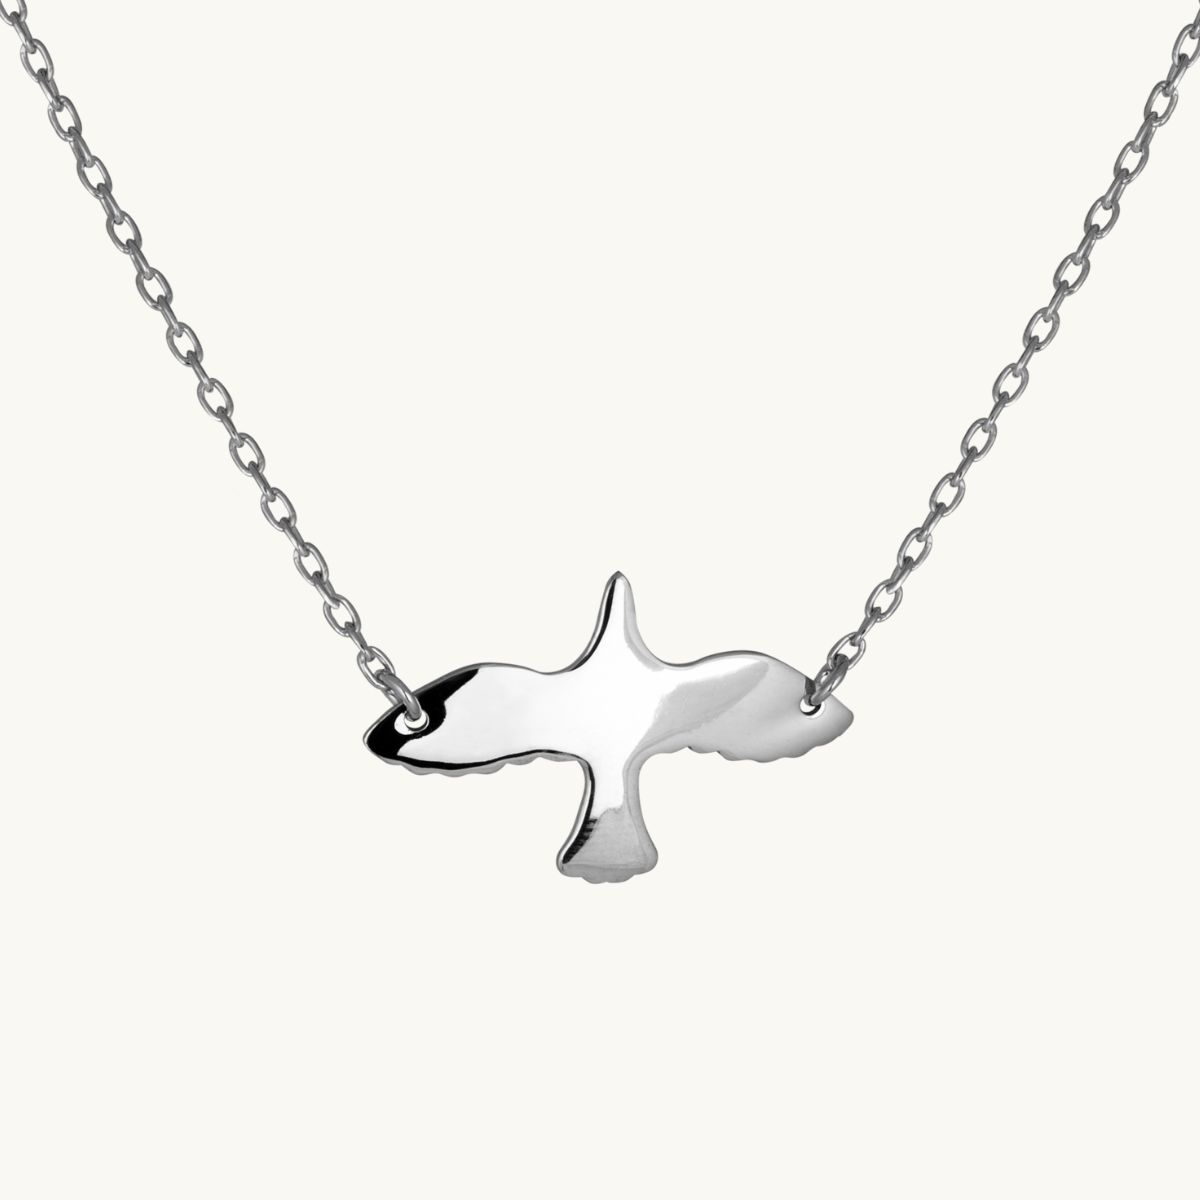 3D Dove Sterling Silver Cremation Jewelry Pendant Necklace for Ashes